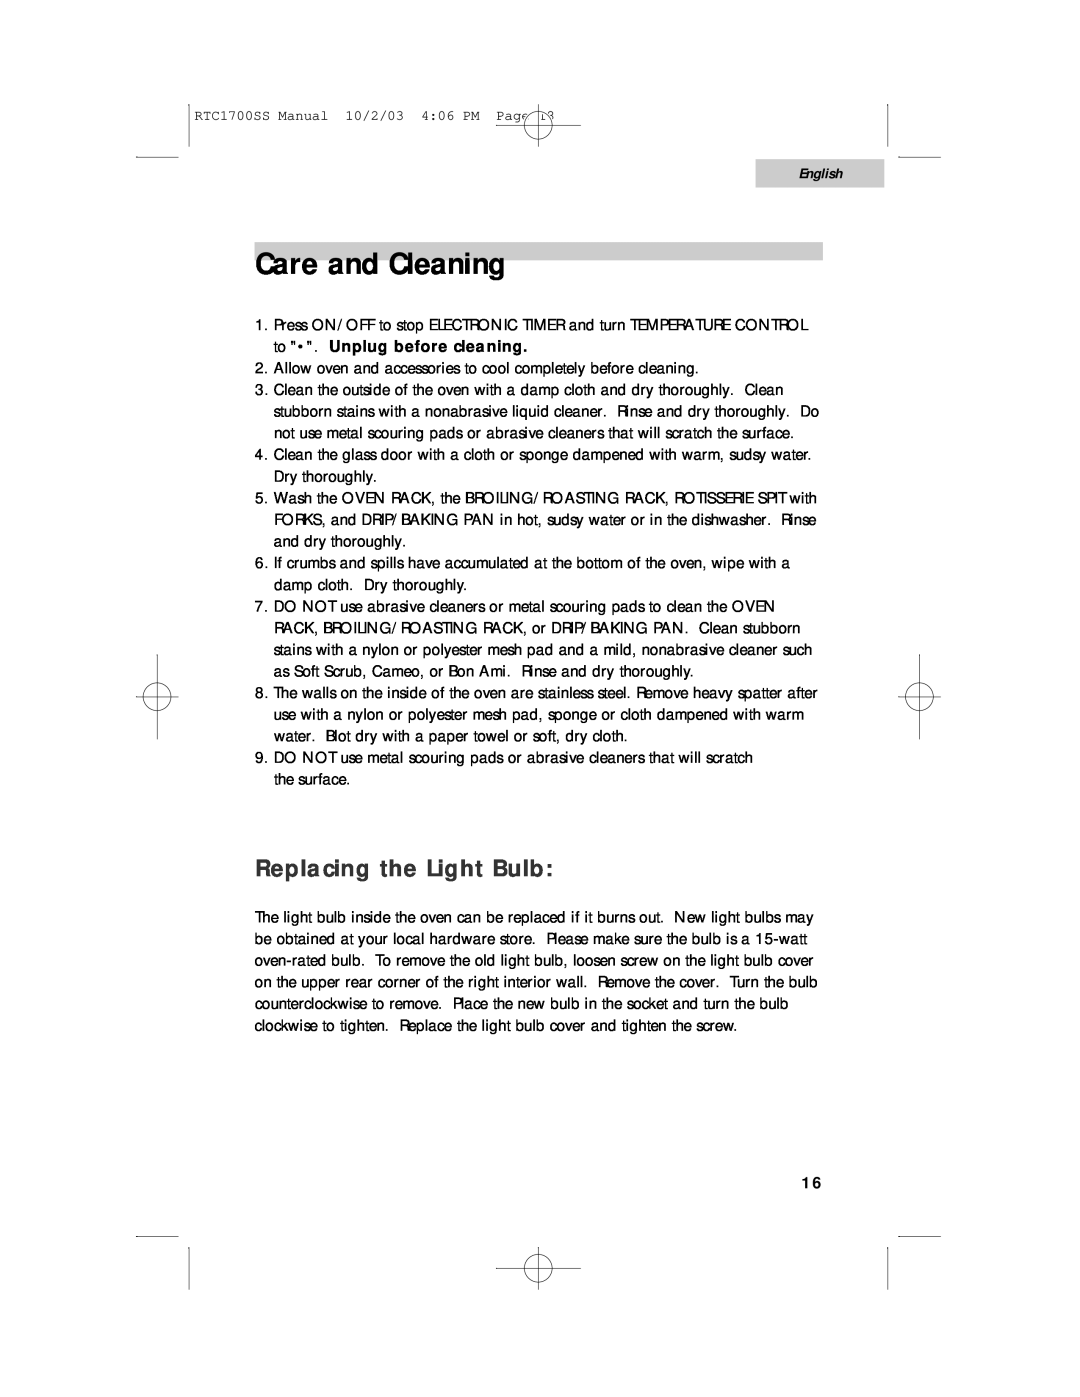 Haier RTC1700SS user manual Care and Cleaning, Replacing the Light Bulb, English 